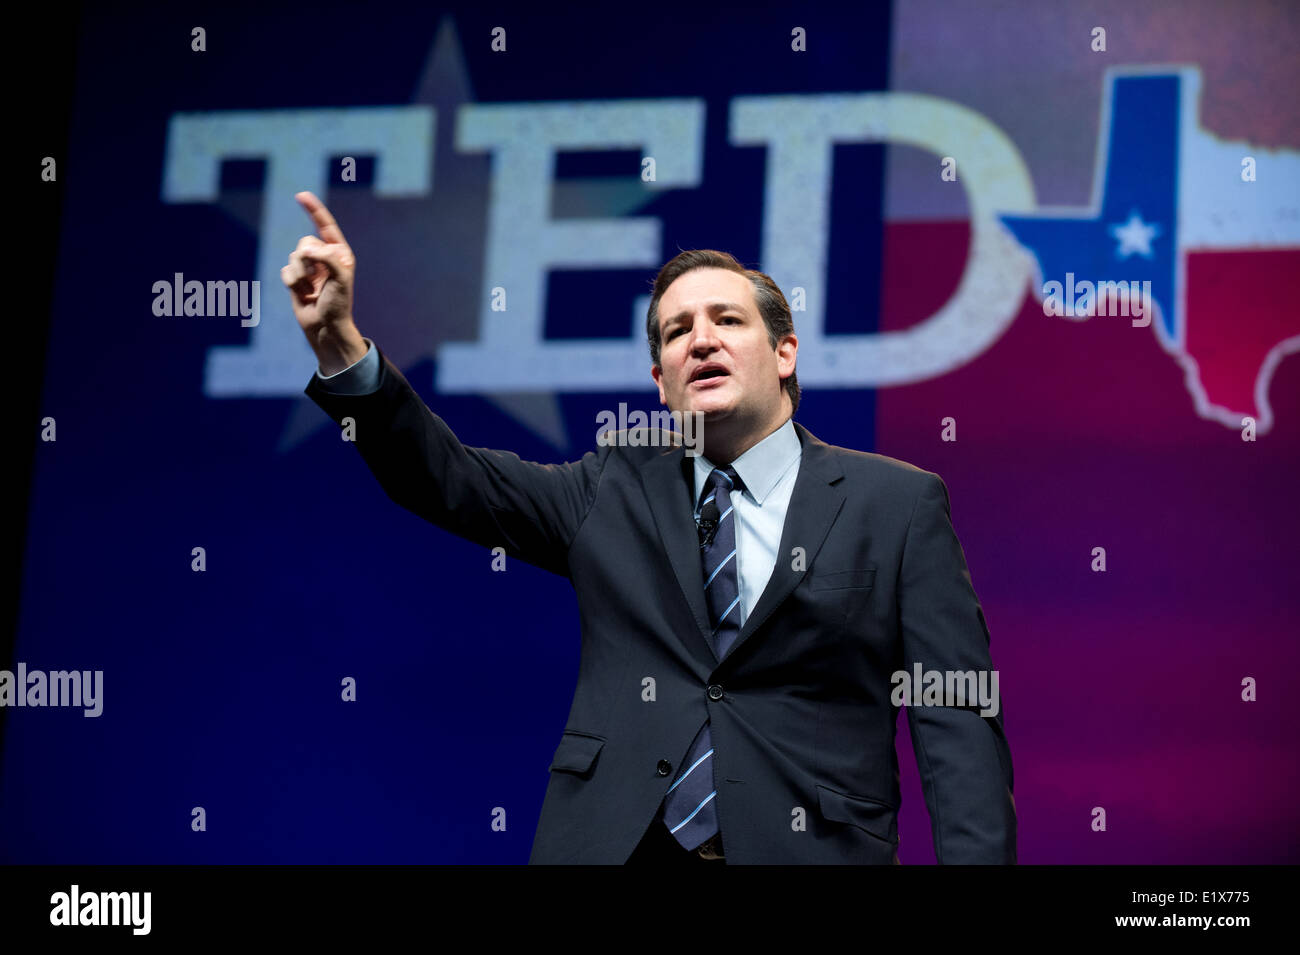 US Senator from Texas, Ted Cruz gives speech at the Texas Republican Convention in Fort Worth, Texas Stock Photo